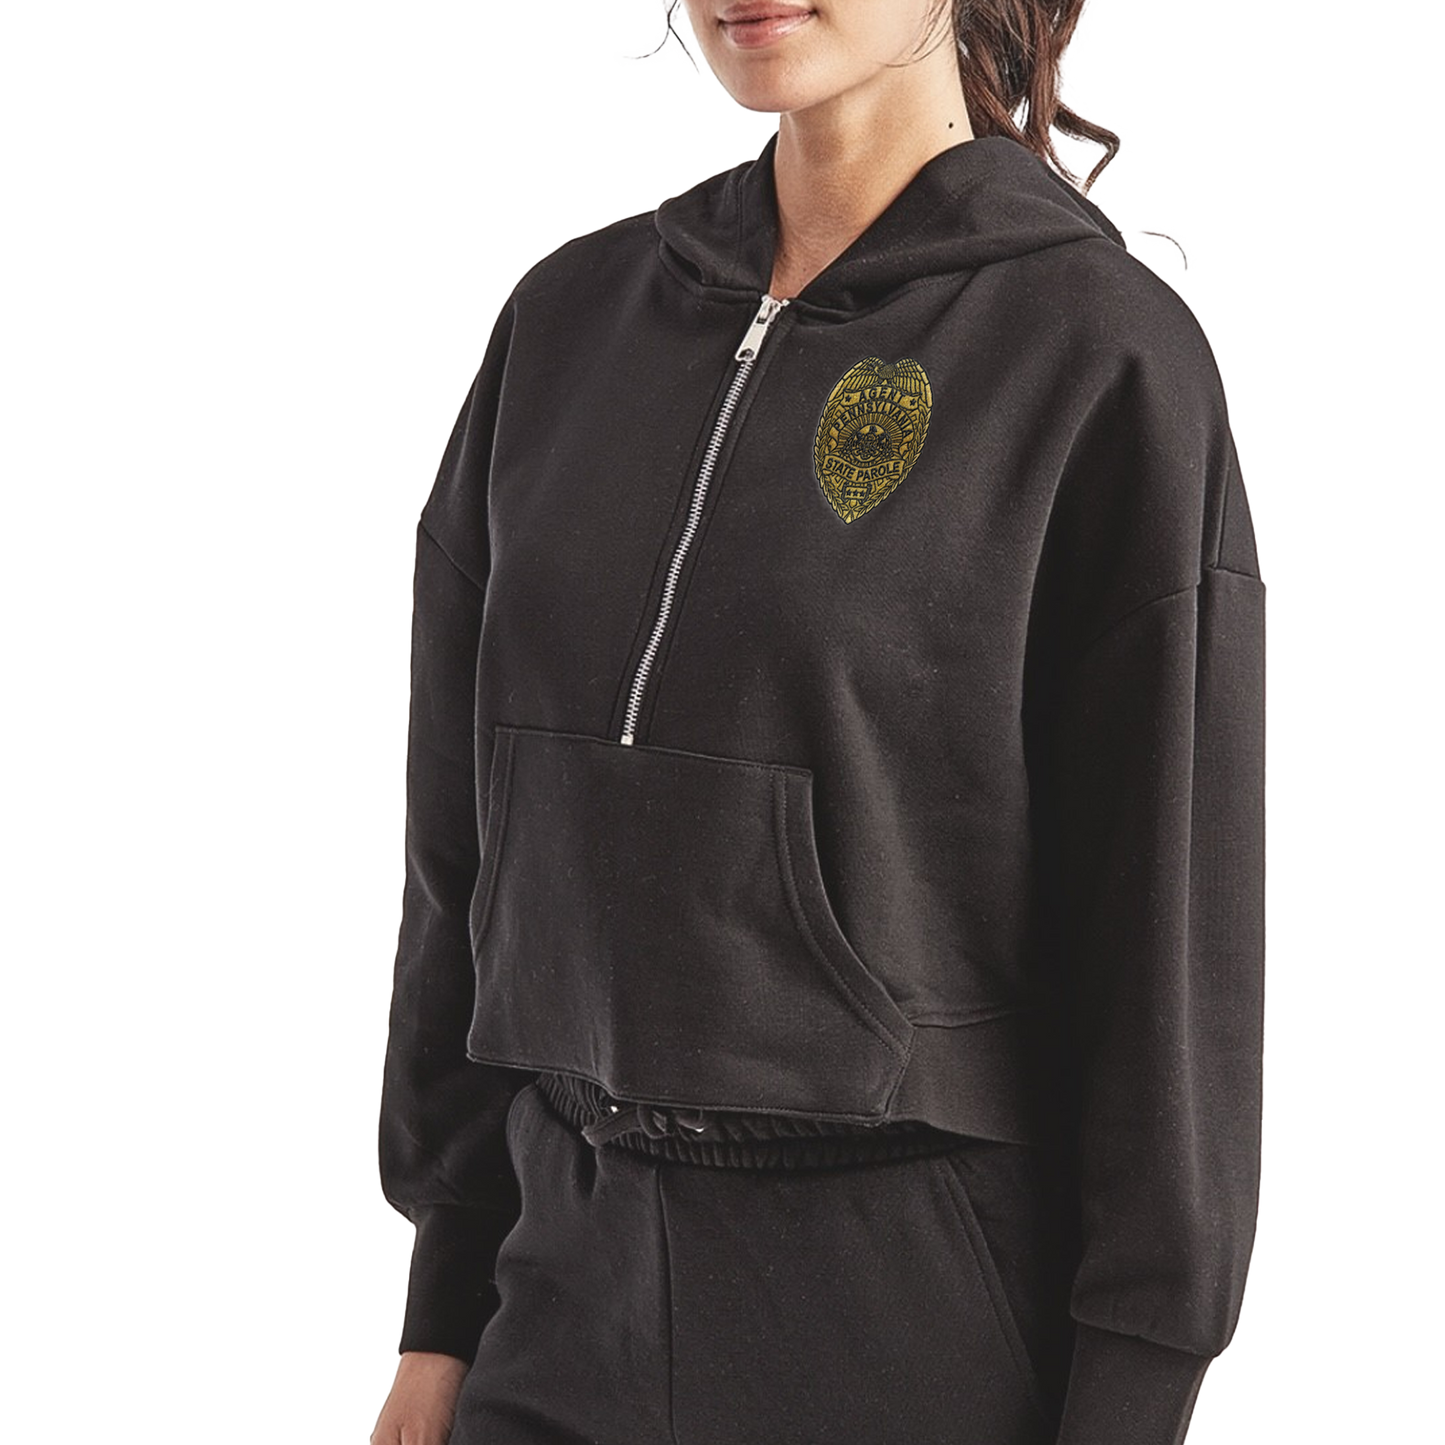 Ladies' Half-Zip Hooded Sweatshirt with Embroidered State Parole Agent Logos (Various Colors)